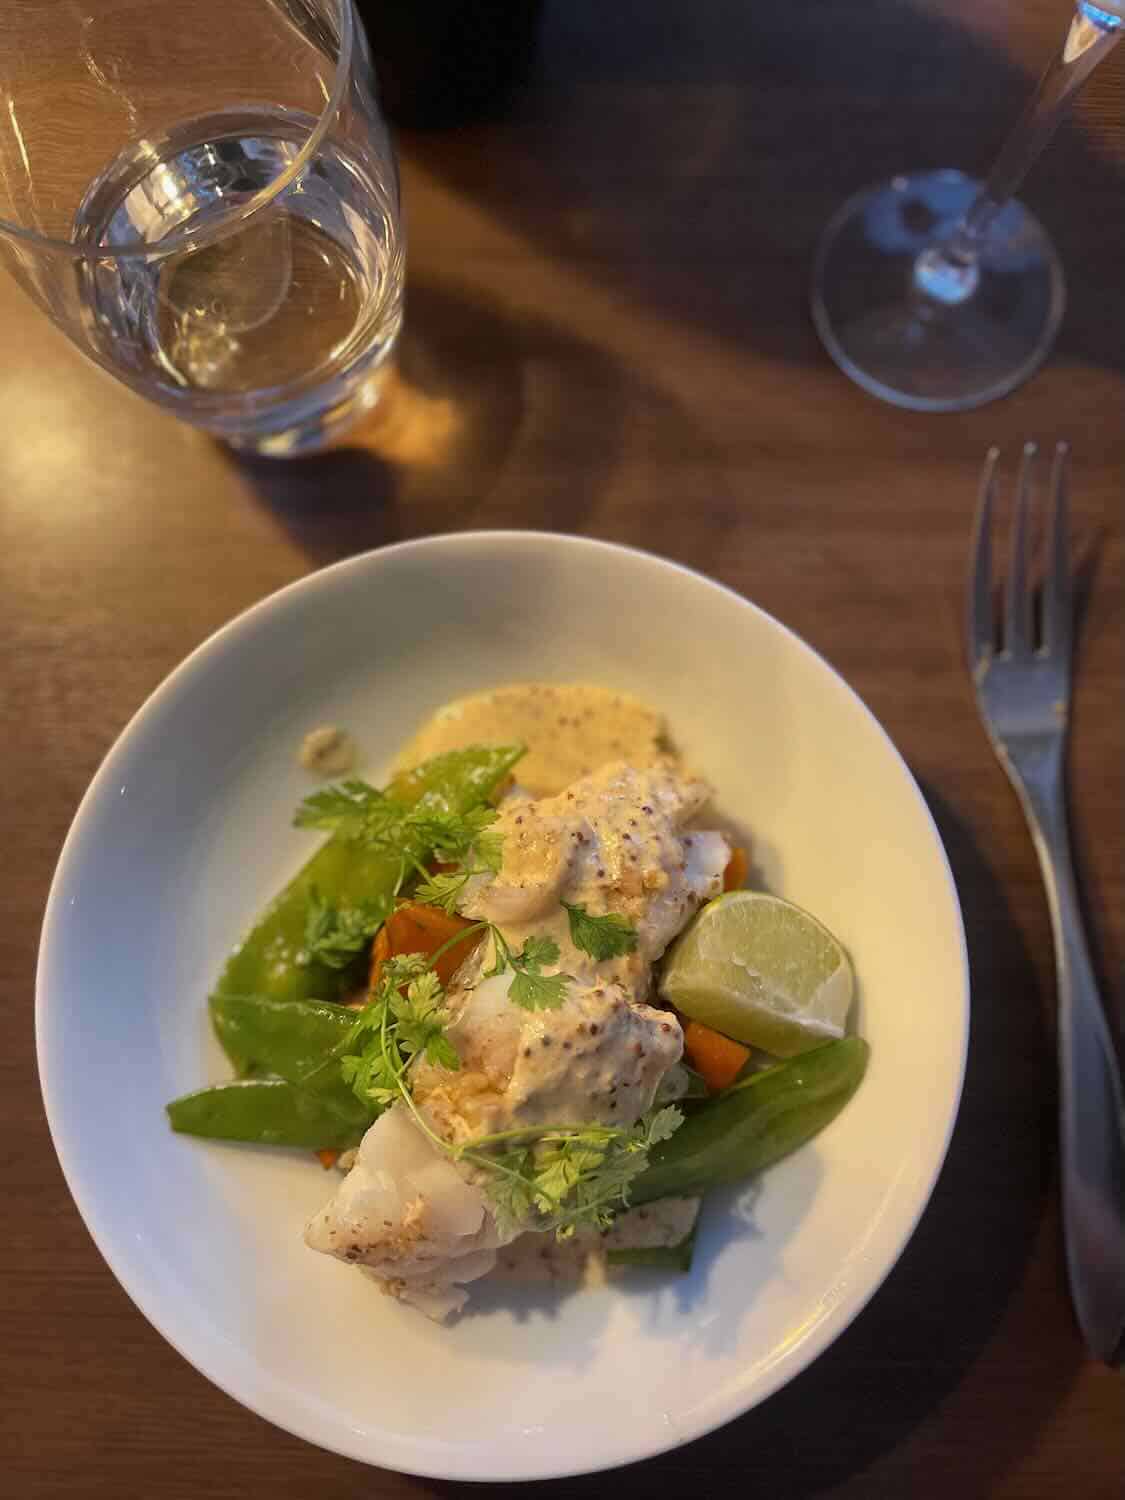 A close-up of a beautifully plated dish in Paris, featuring fish with vegetables, garnished with fresh herbs and a slice of lime, with a glass of water and wine in the background.